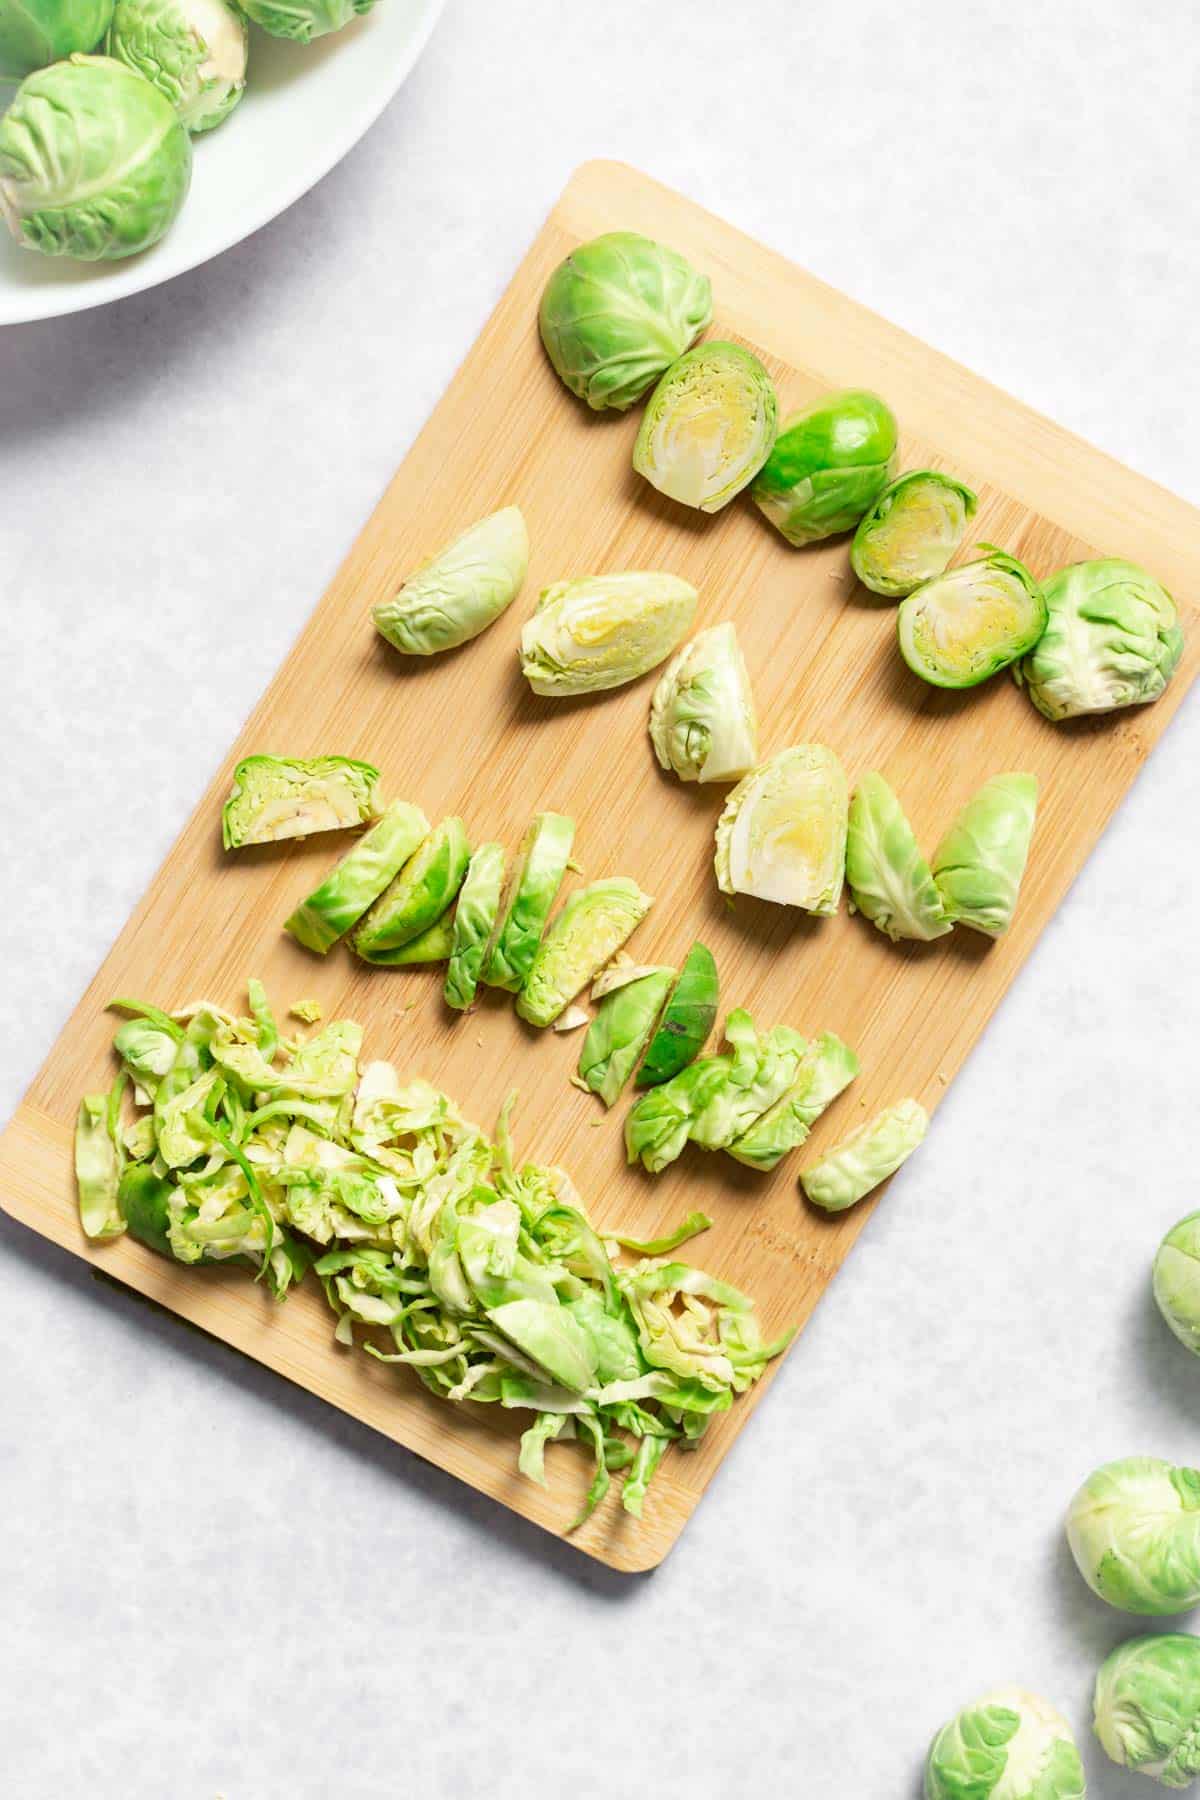 top view of brussel sprouts cut 4 ways on a cutting board